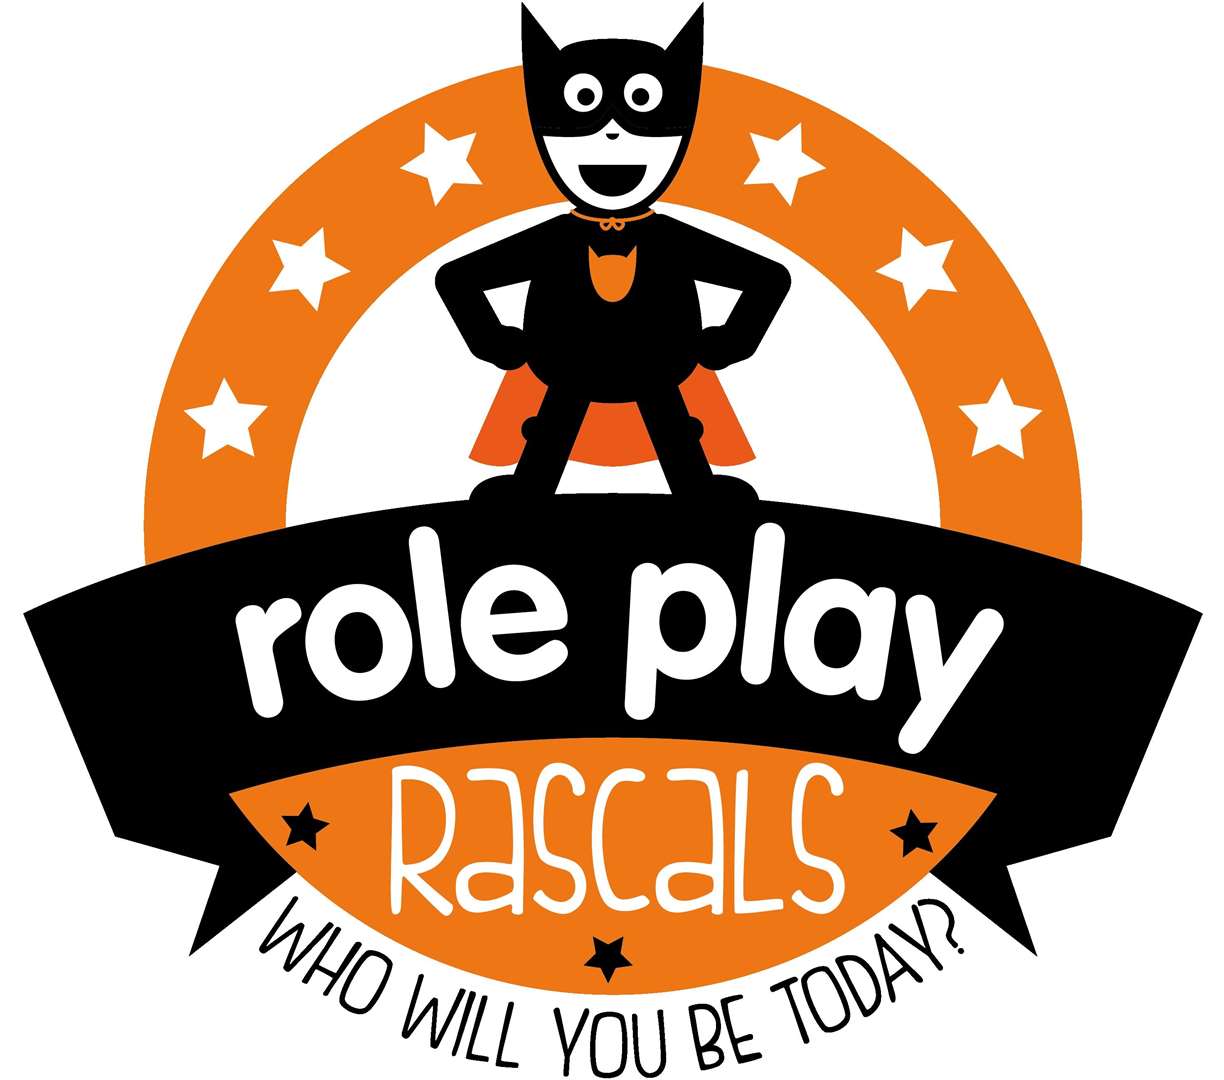 Role Play Rascals is coming to Faversham (20923129)